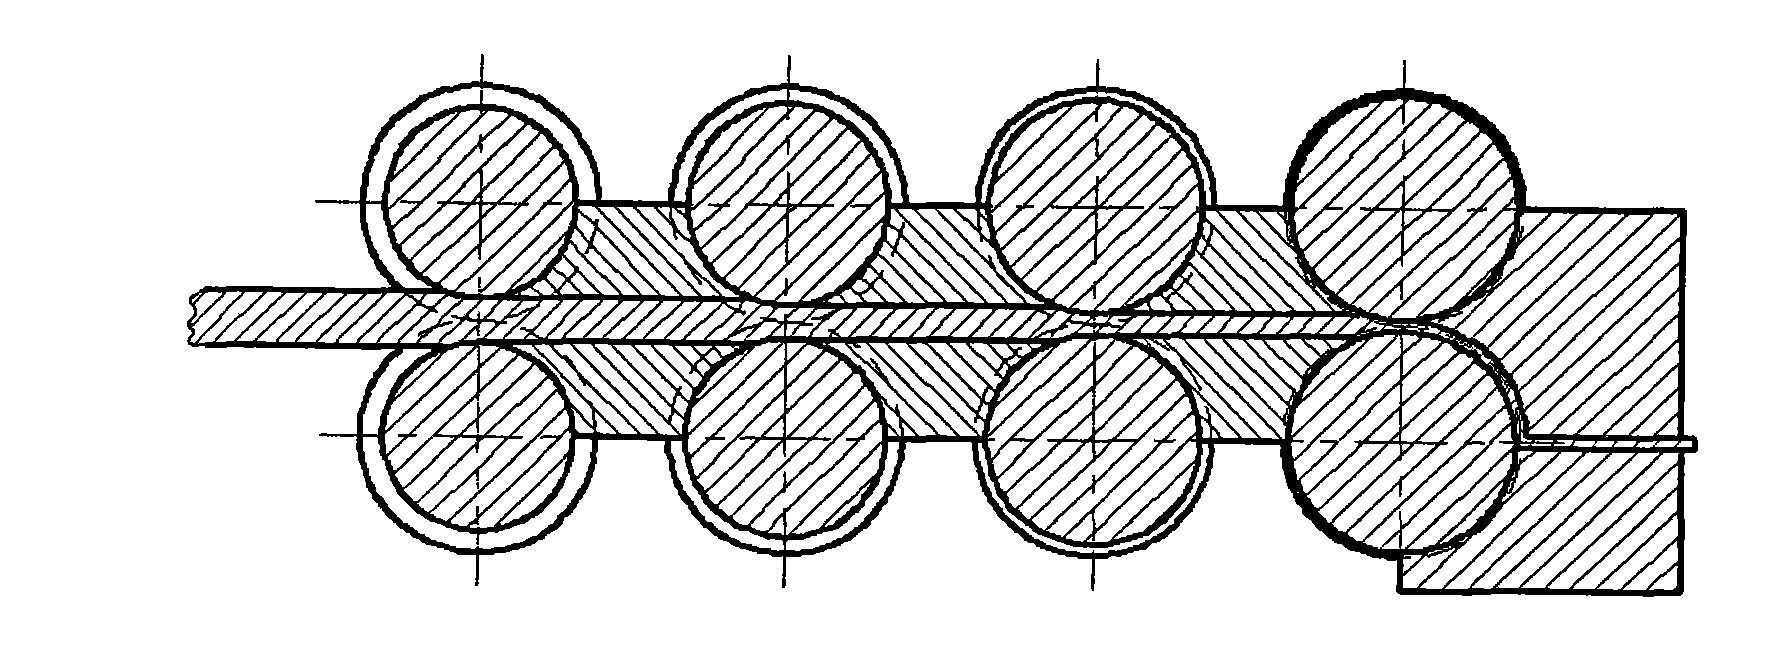 Metal material large-strain processing method based on multi-pair wheel rolling and equal channel corner extrusion